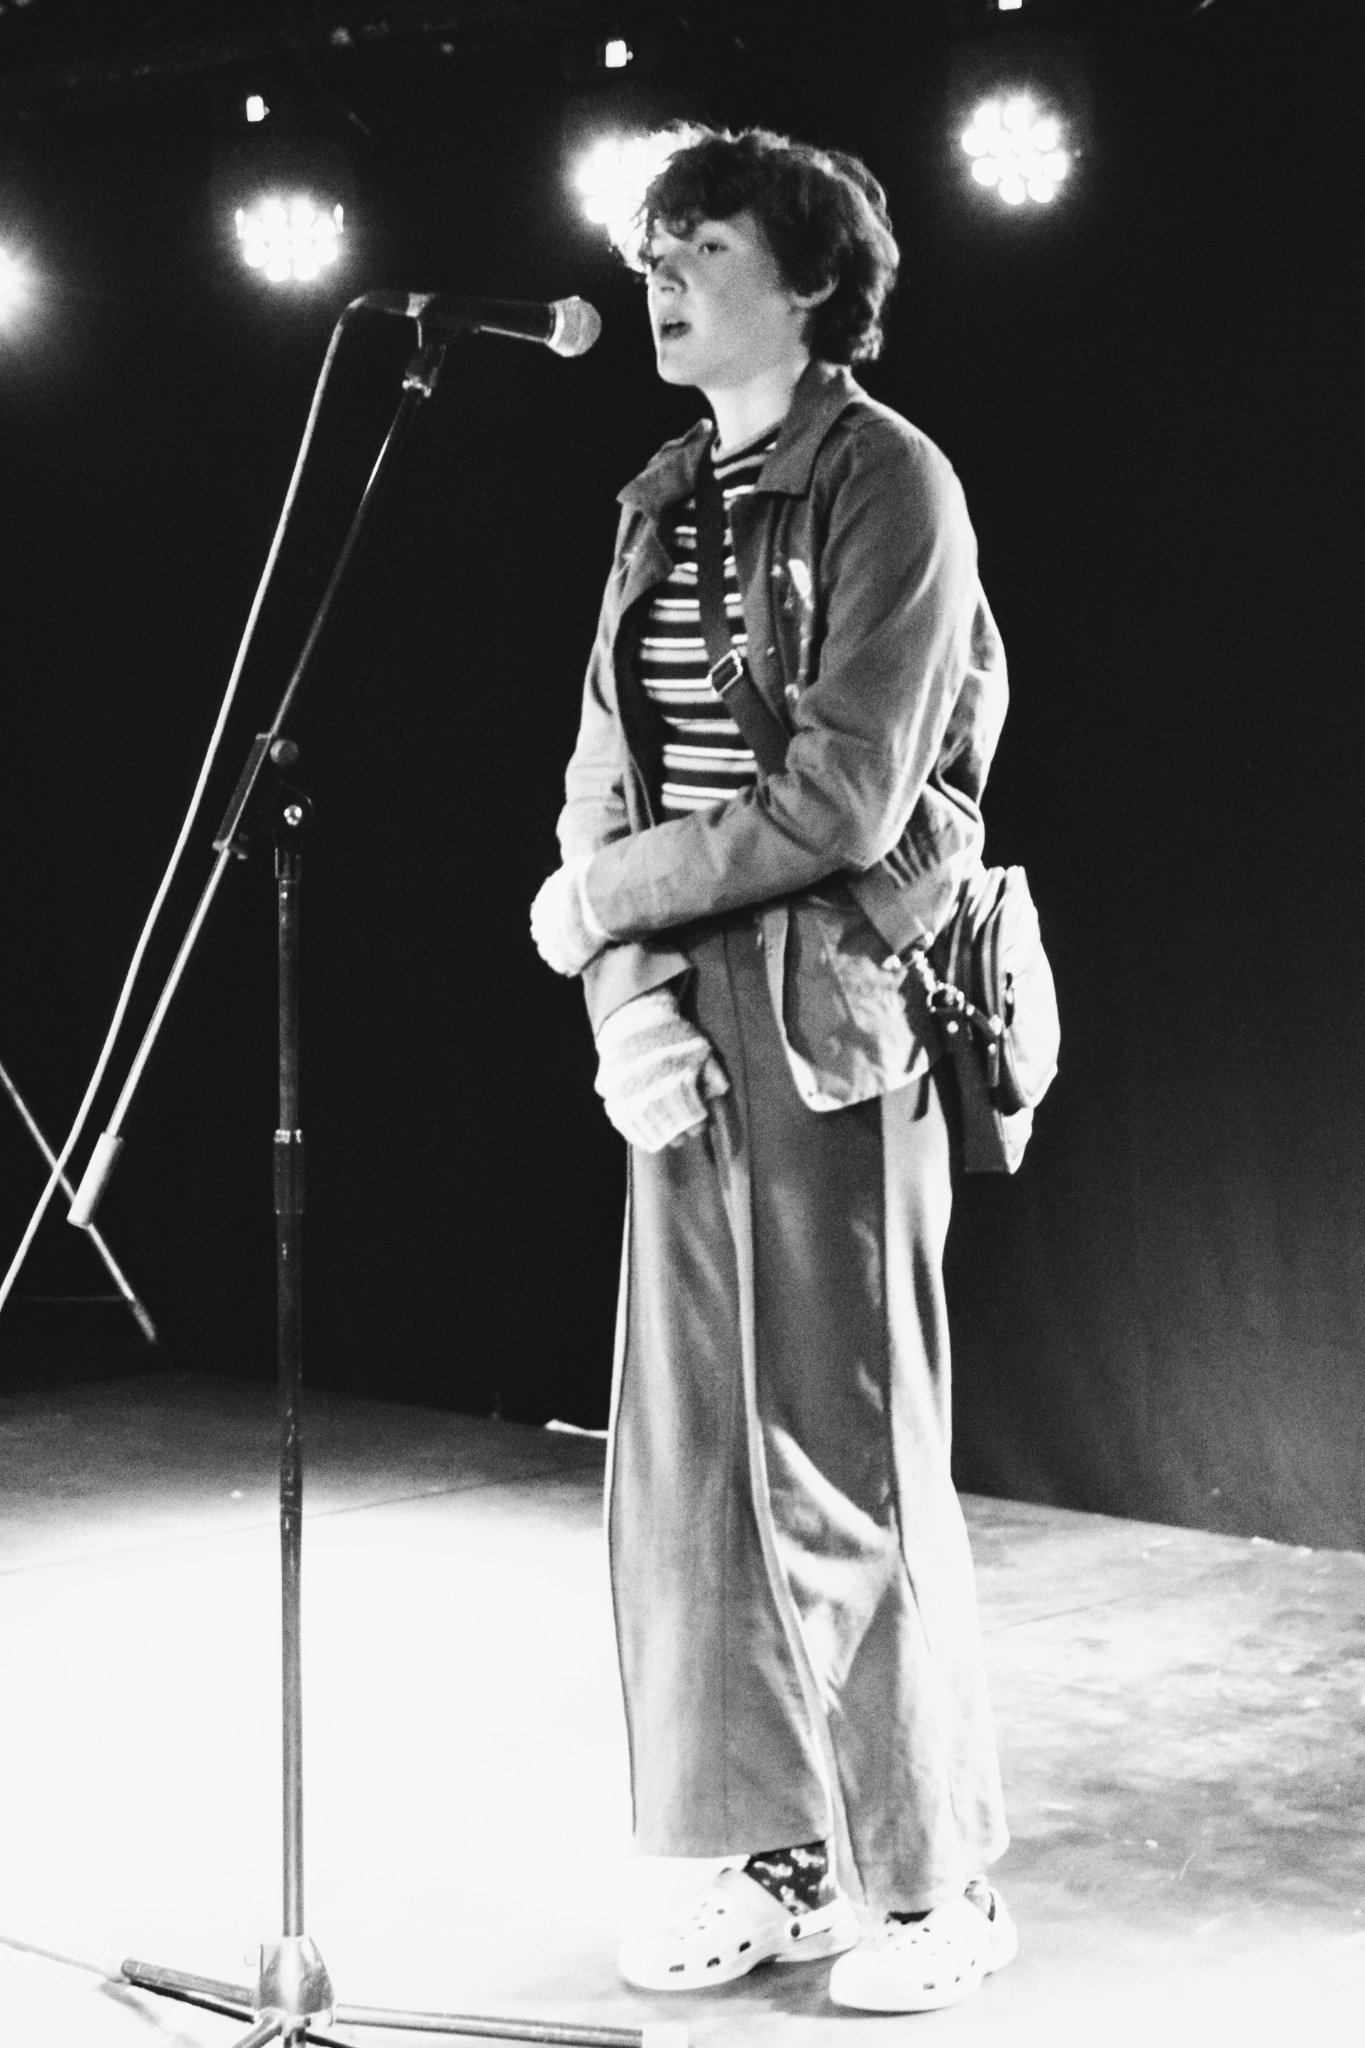 Black and white photo of a young person standing in front of a microphone on stage